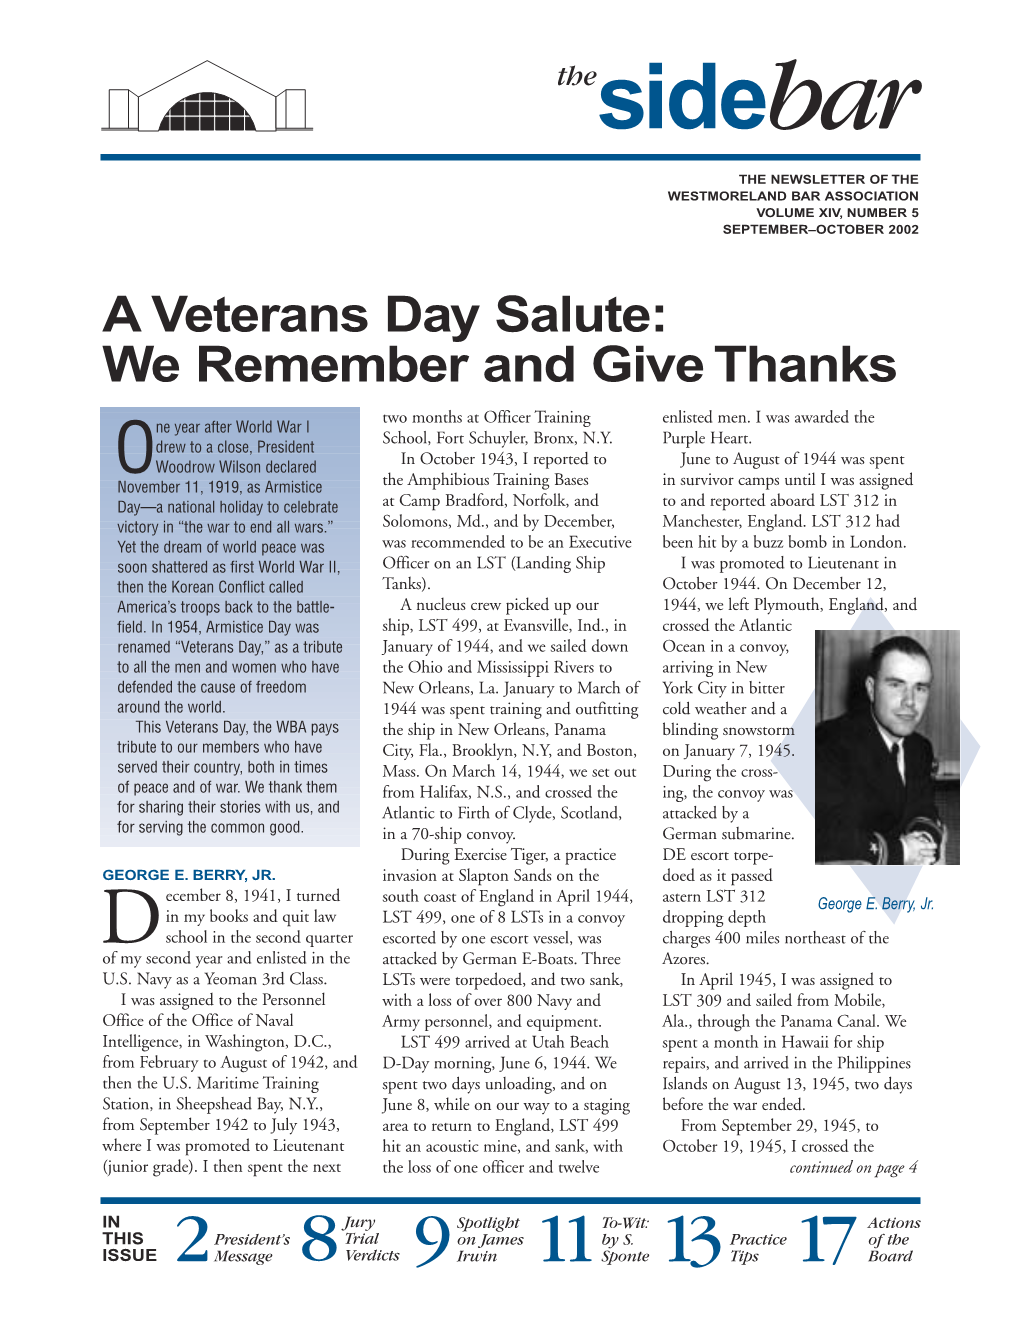 A Veterans Day Salute: We Remember and Give Thanks